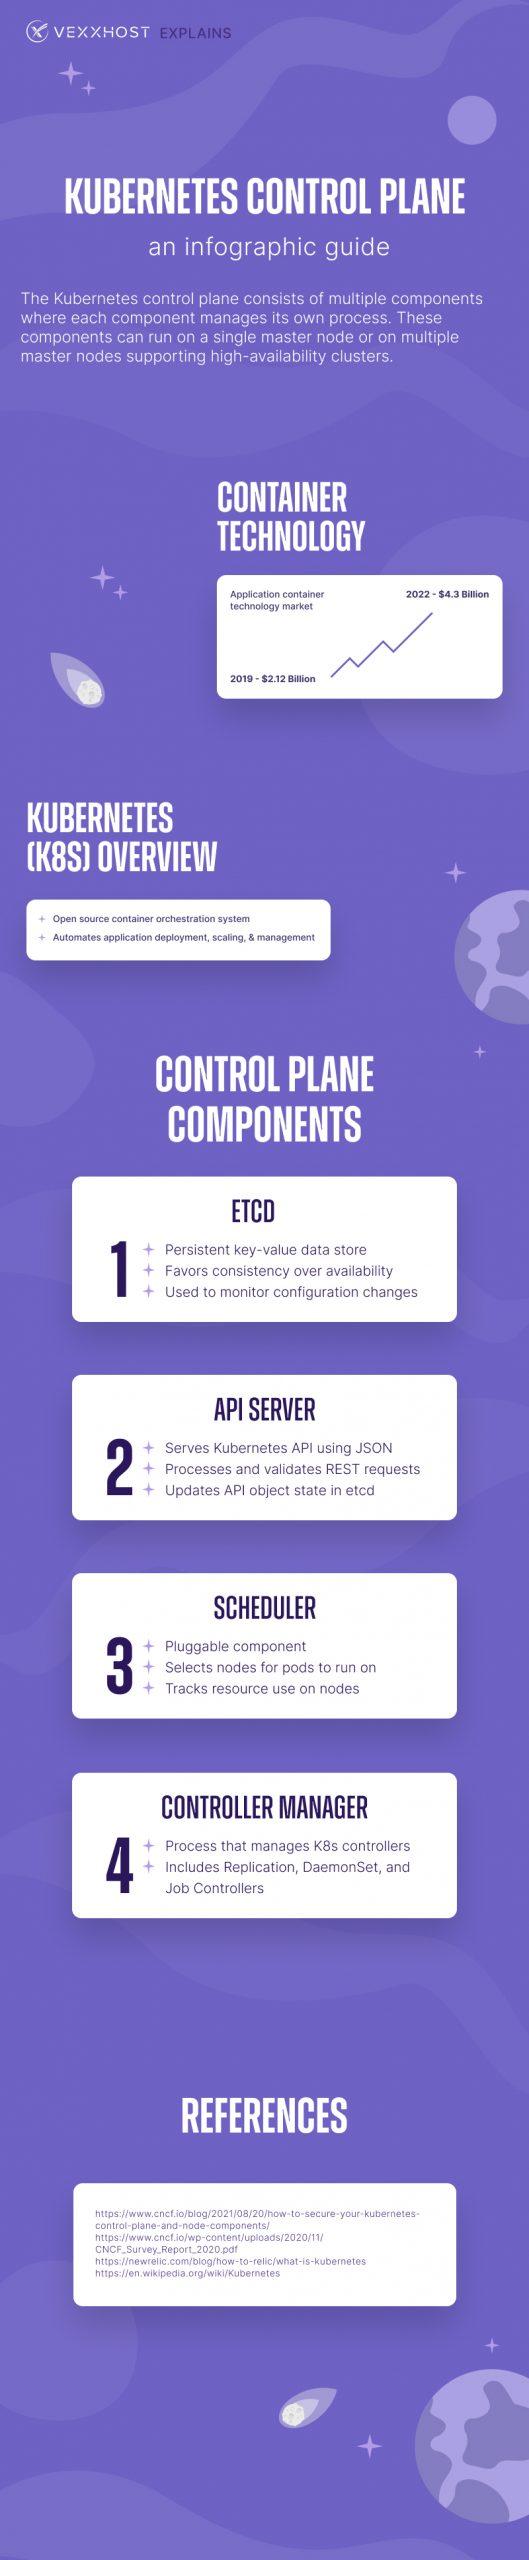 Kubernetes Control Plane - An Infographic Overview